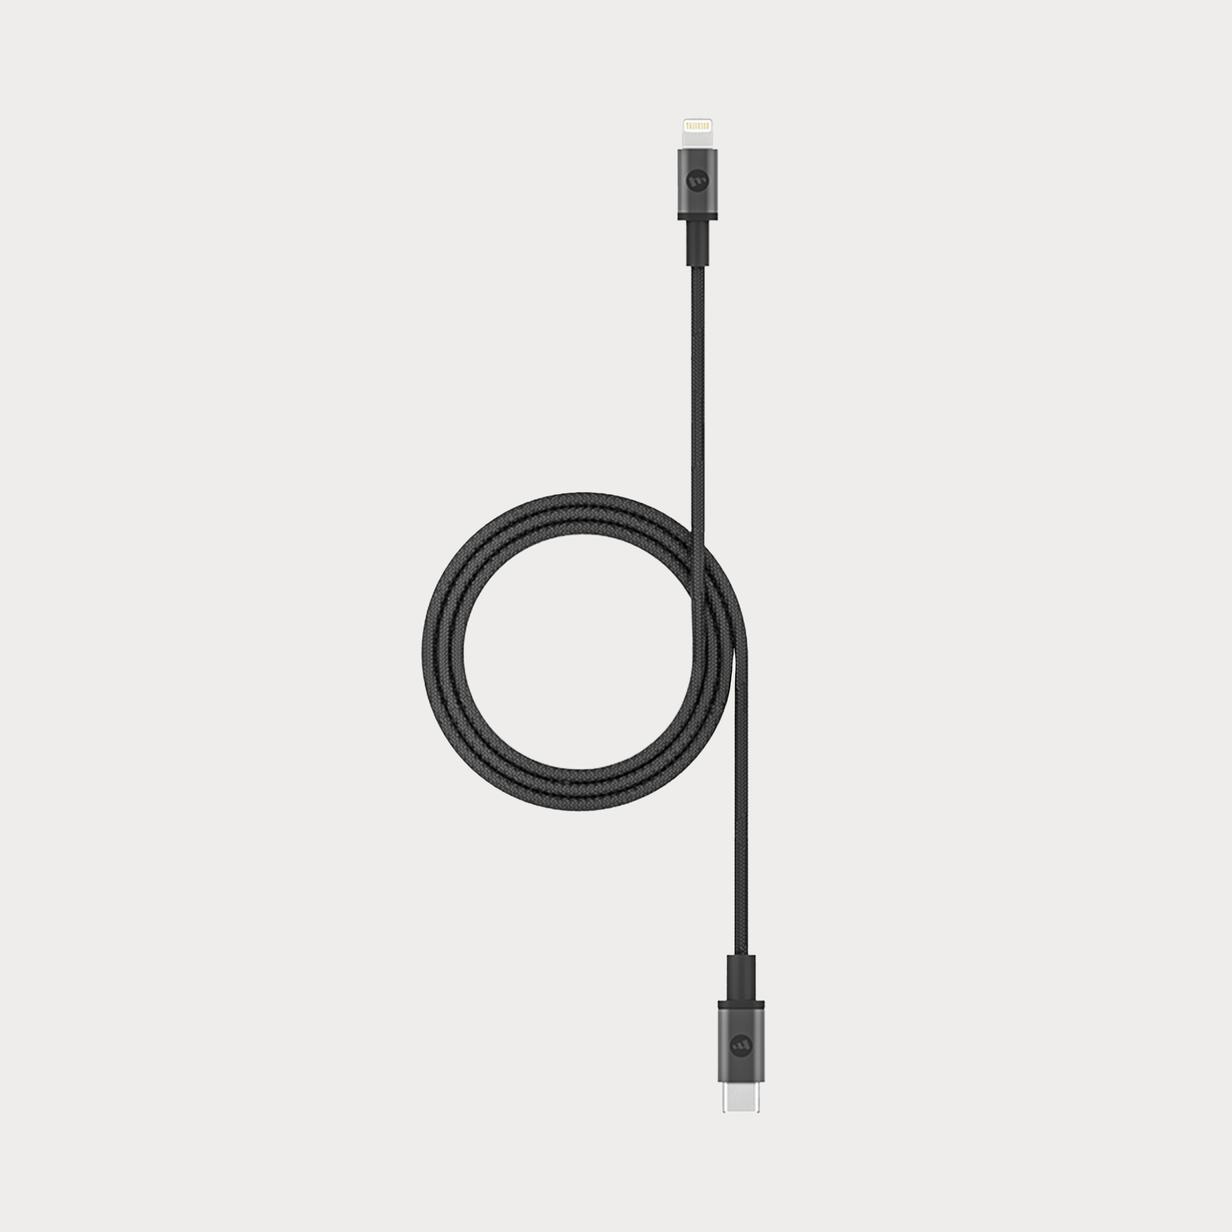 Mophie 409903289 USB C to Apple Lightning Cable 3 ft Black 01